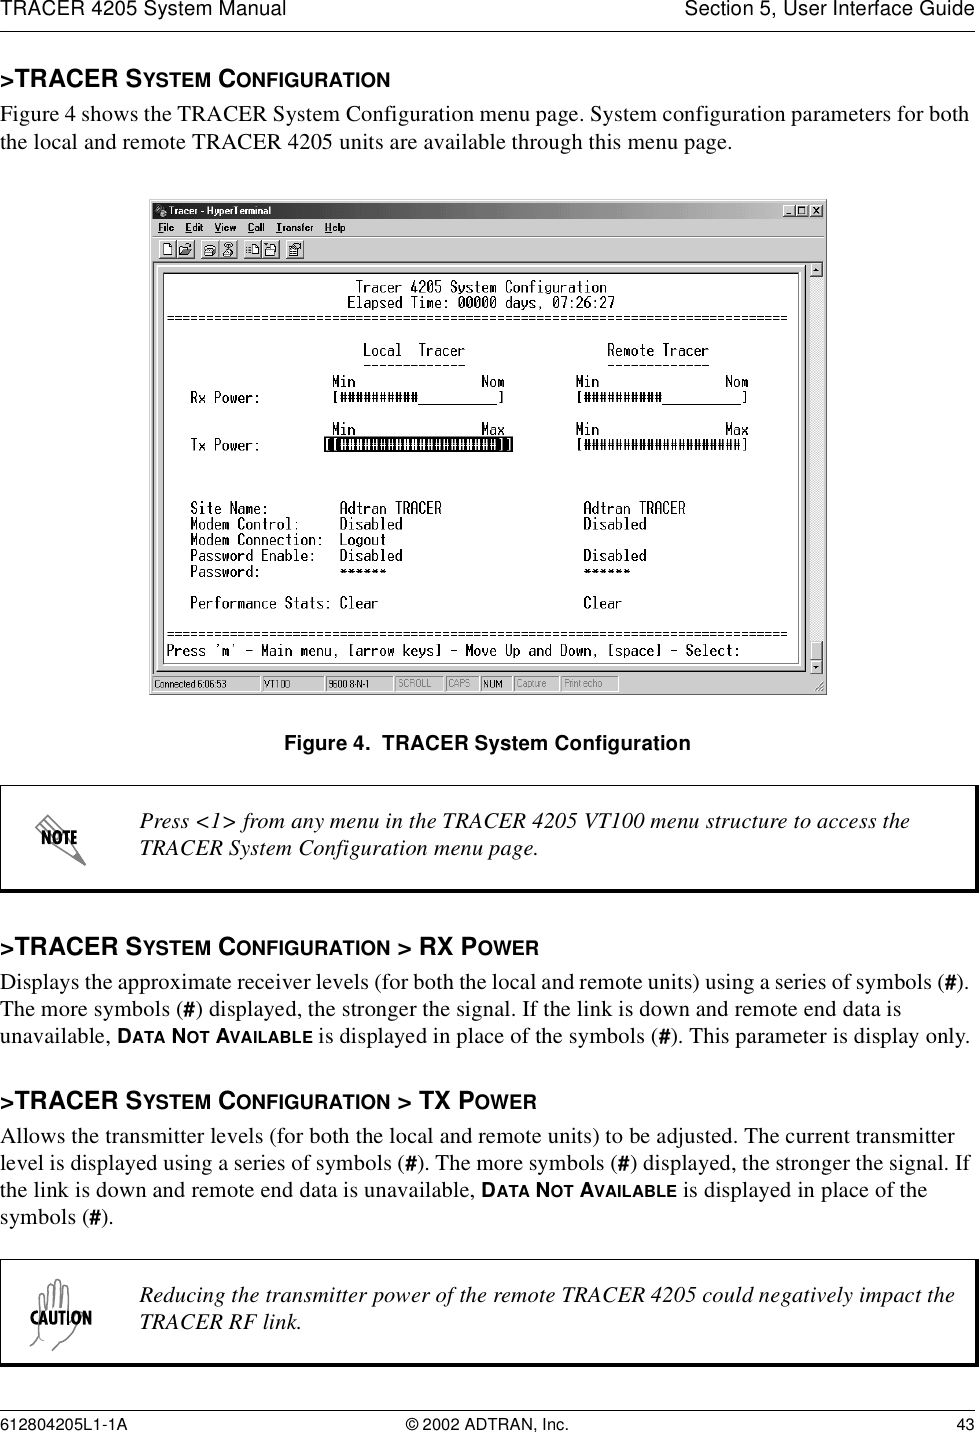 TRACER 4205 System Manual Section 5, User Interface Guide612804205L1-1A © 2002 ADTRAN, Inc. 43&gt;TRACER SYSTEM CONFIGURATIONFigure 4 shows the TRACER System Configuration menu page. System configuration parameters for both the local and remote TRACER 4205 units are available through this menu page.Figure 4.  TRACER System Configuration&gt;TRACER SYSTEM CONFIGURATION &gt; RX POWERDisplays the approximate receiver levels (for both the local and remote units) using a series of symbols (#). The more symbols (#) displayed, the stronger the signal. If the link is down and remote end data is unavailable, DATA NOT AVAILABLE is displayed in place of the symbols (#). This parameter is display only.&gt;TRACER SYSTEM CONFIGURATION &gt; TX POWERAllows the transmitter levels (for both the local and remote units) to be adjusted. The current transmitter level is displayed using a series of symbols (#). The more symbols (#) displayed, the stronger the signal. If the link is down and remote end data is unavailable, DATA NOT AVAILABLE is displayed in place of the symbols (#).Press &lt;1&gt; from any menu in the TRACER 4205 VT100 menu structure to access the TRACER System Configuration menu page.Reducing the transmitter power of the remote TRACER 4205 could negatively impact the TRACER RF link.